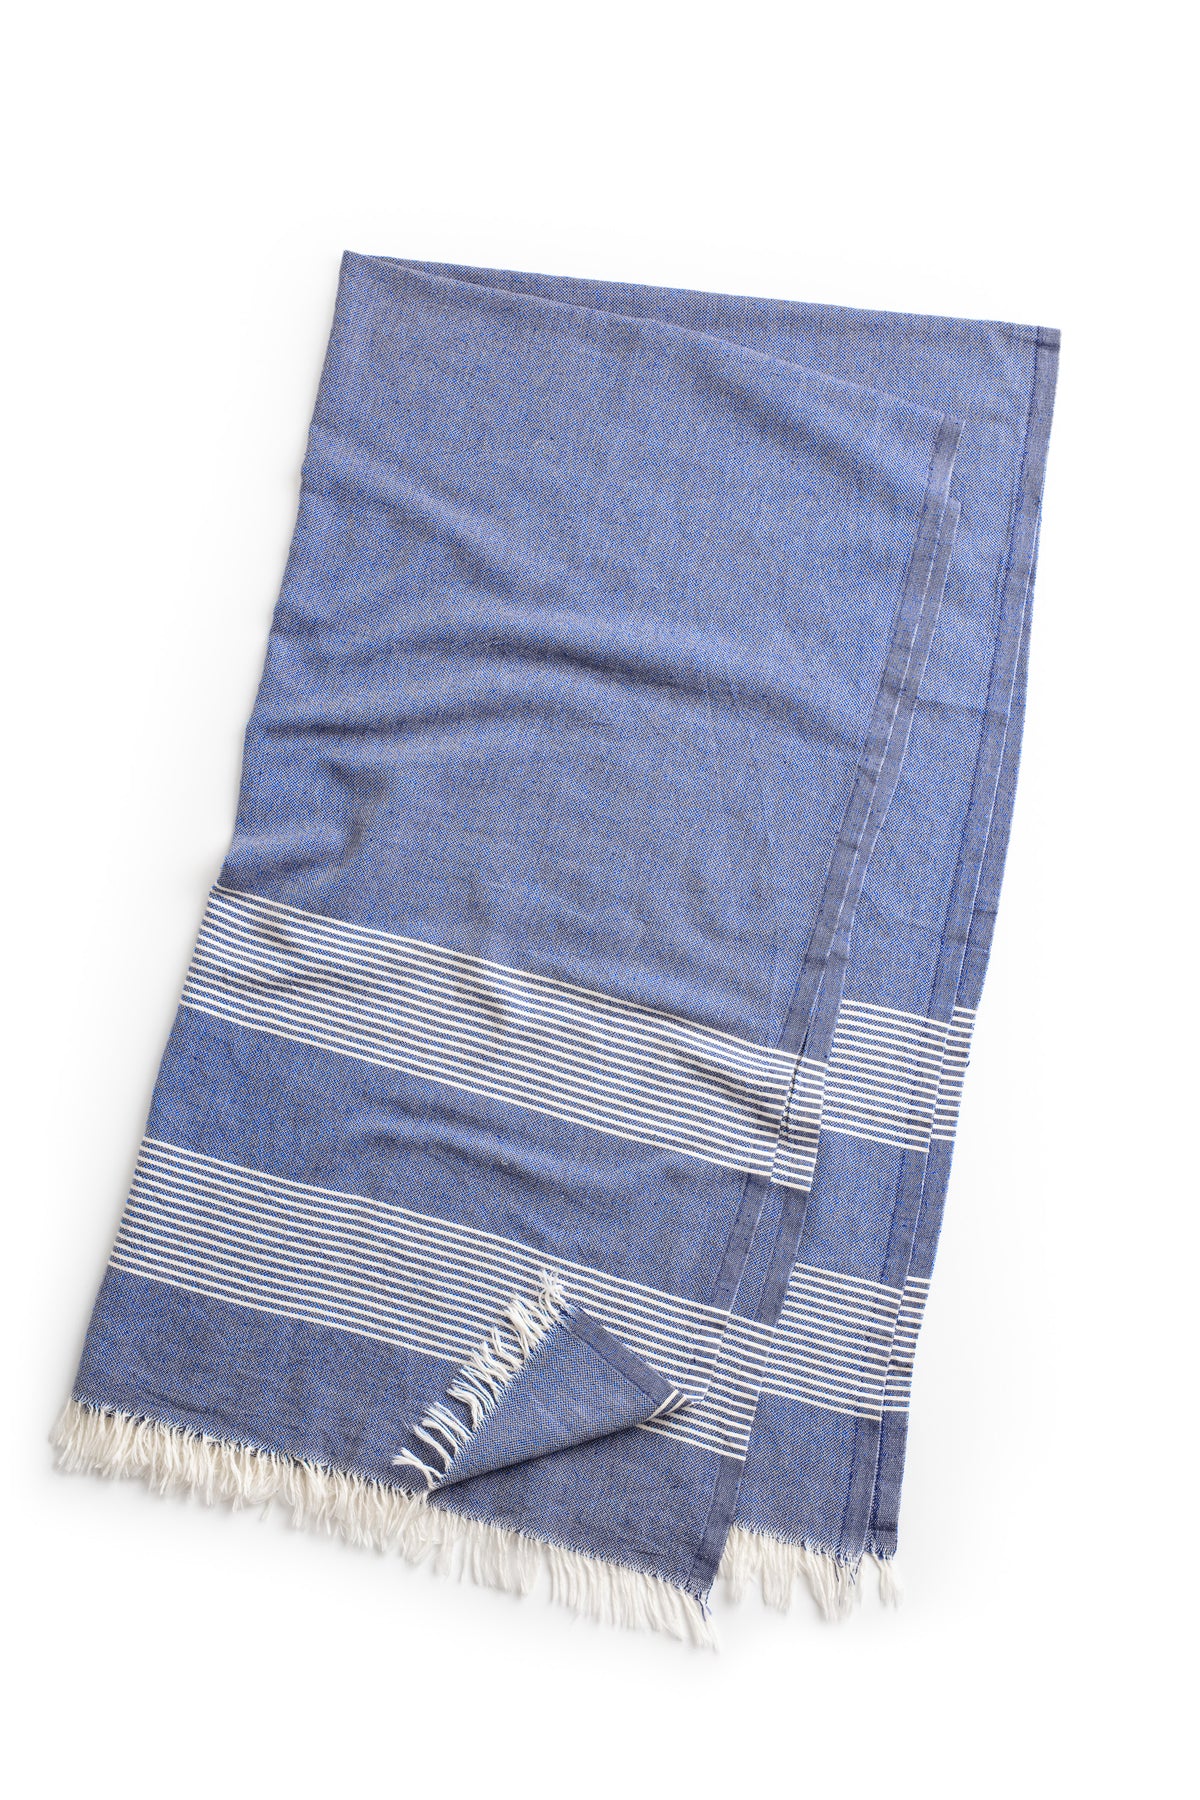 a blue and white striped BEACH THROW by Velvet by Graham & Spencer on a white background.-26166472048833